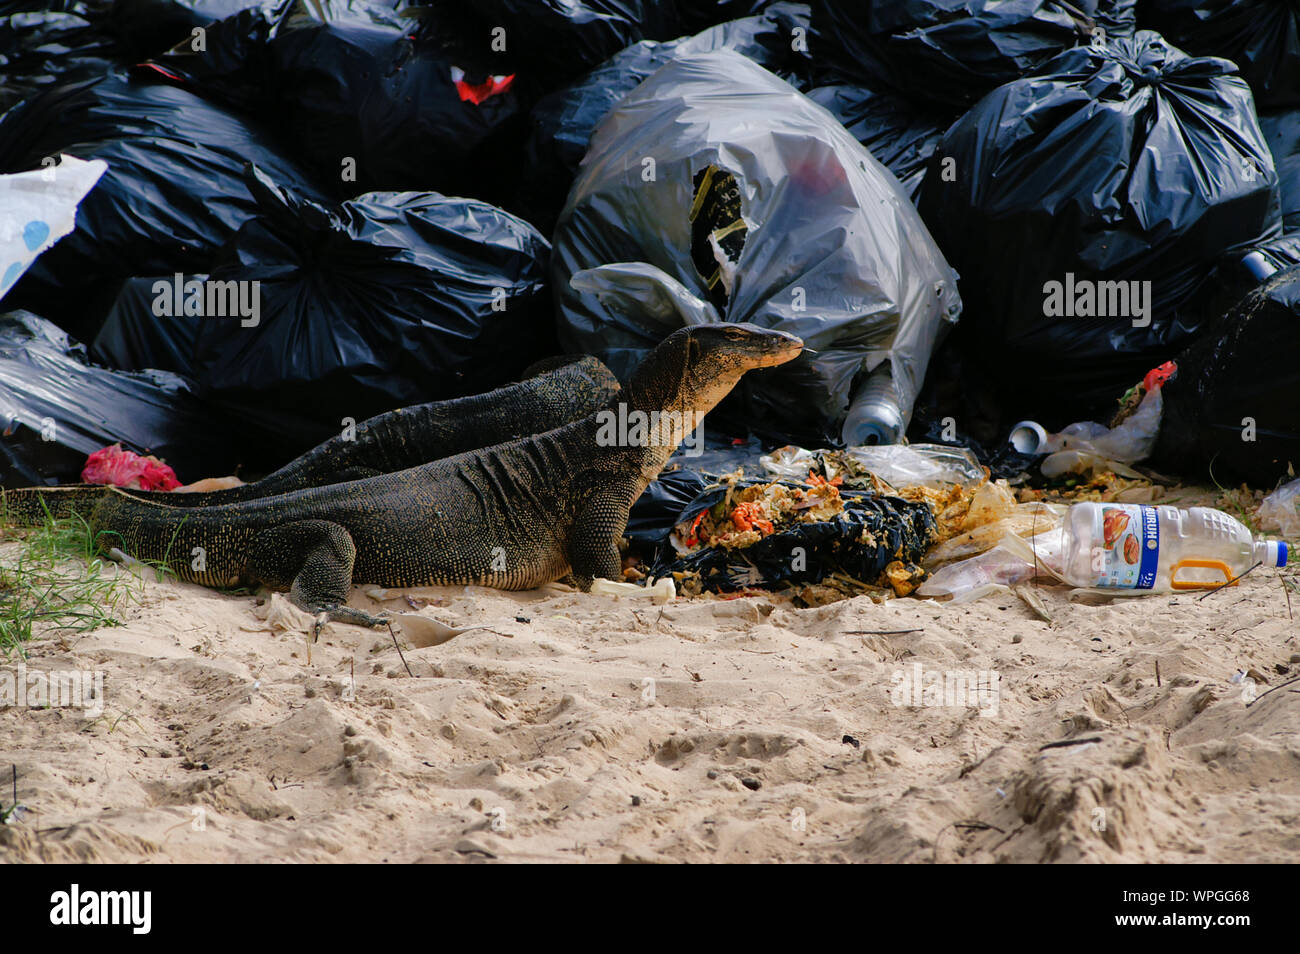 Huge 2 Meters Reptiles Varans Are Eating Garbage/discarded Food From Restaurant. Stock Photo